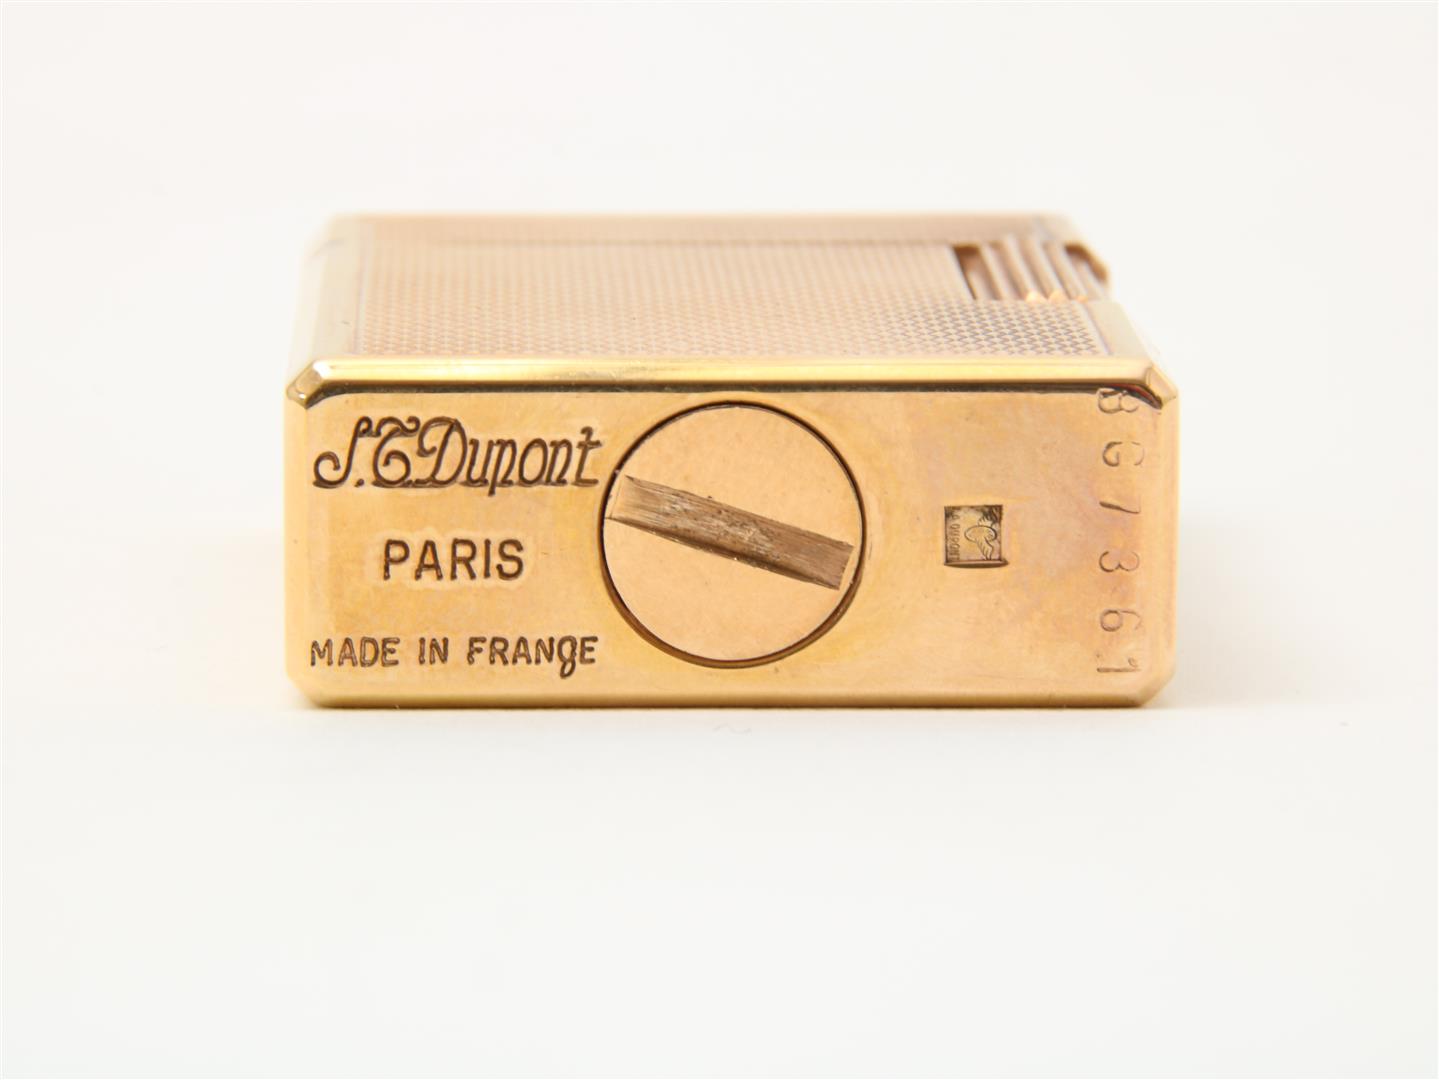 Gold-plated lighter, S.T. Dupont, in original box, numbered BG7361, height 4.8 cm. - Image 3 of 4